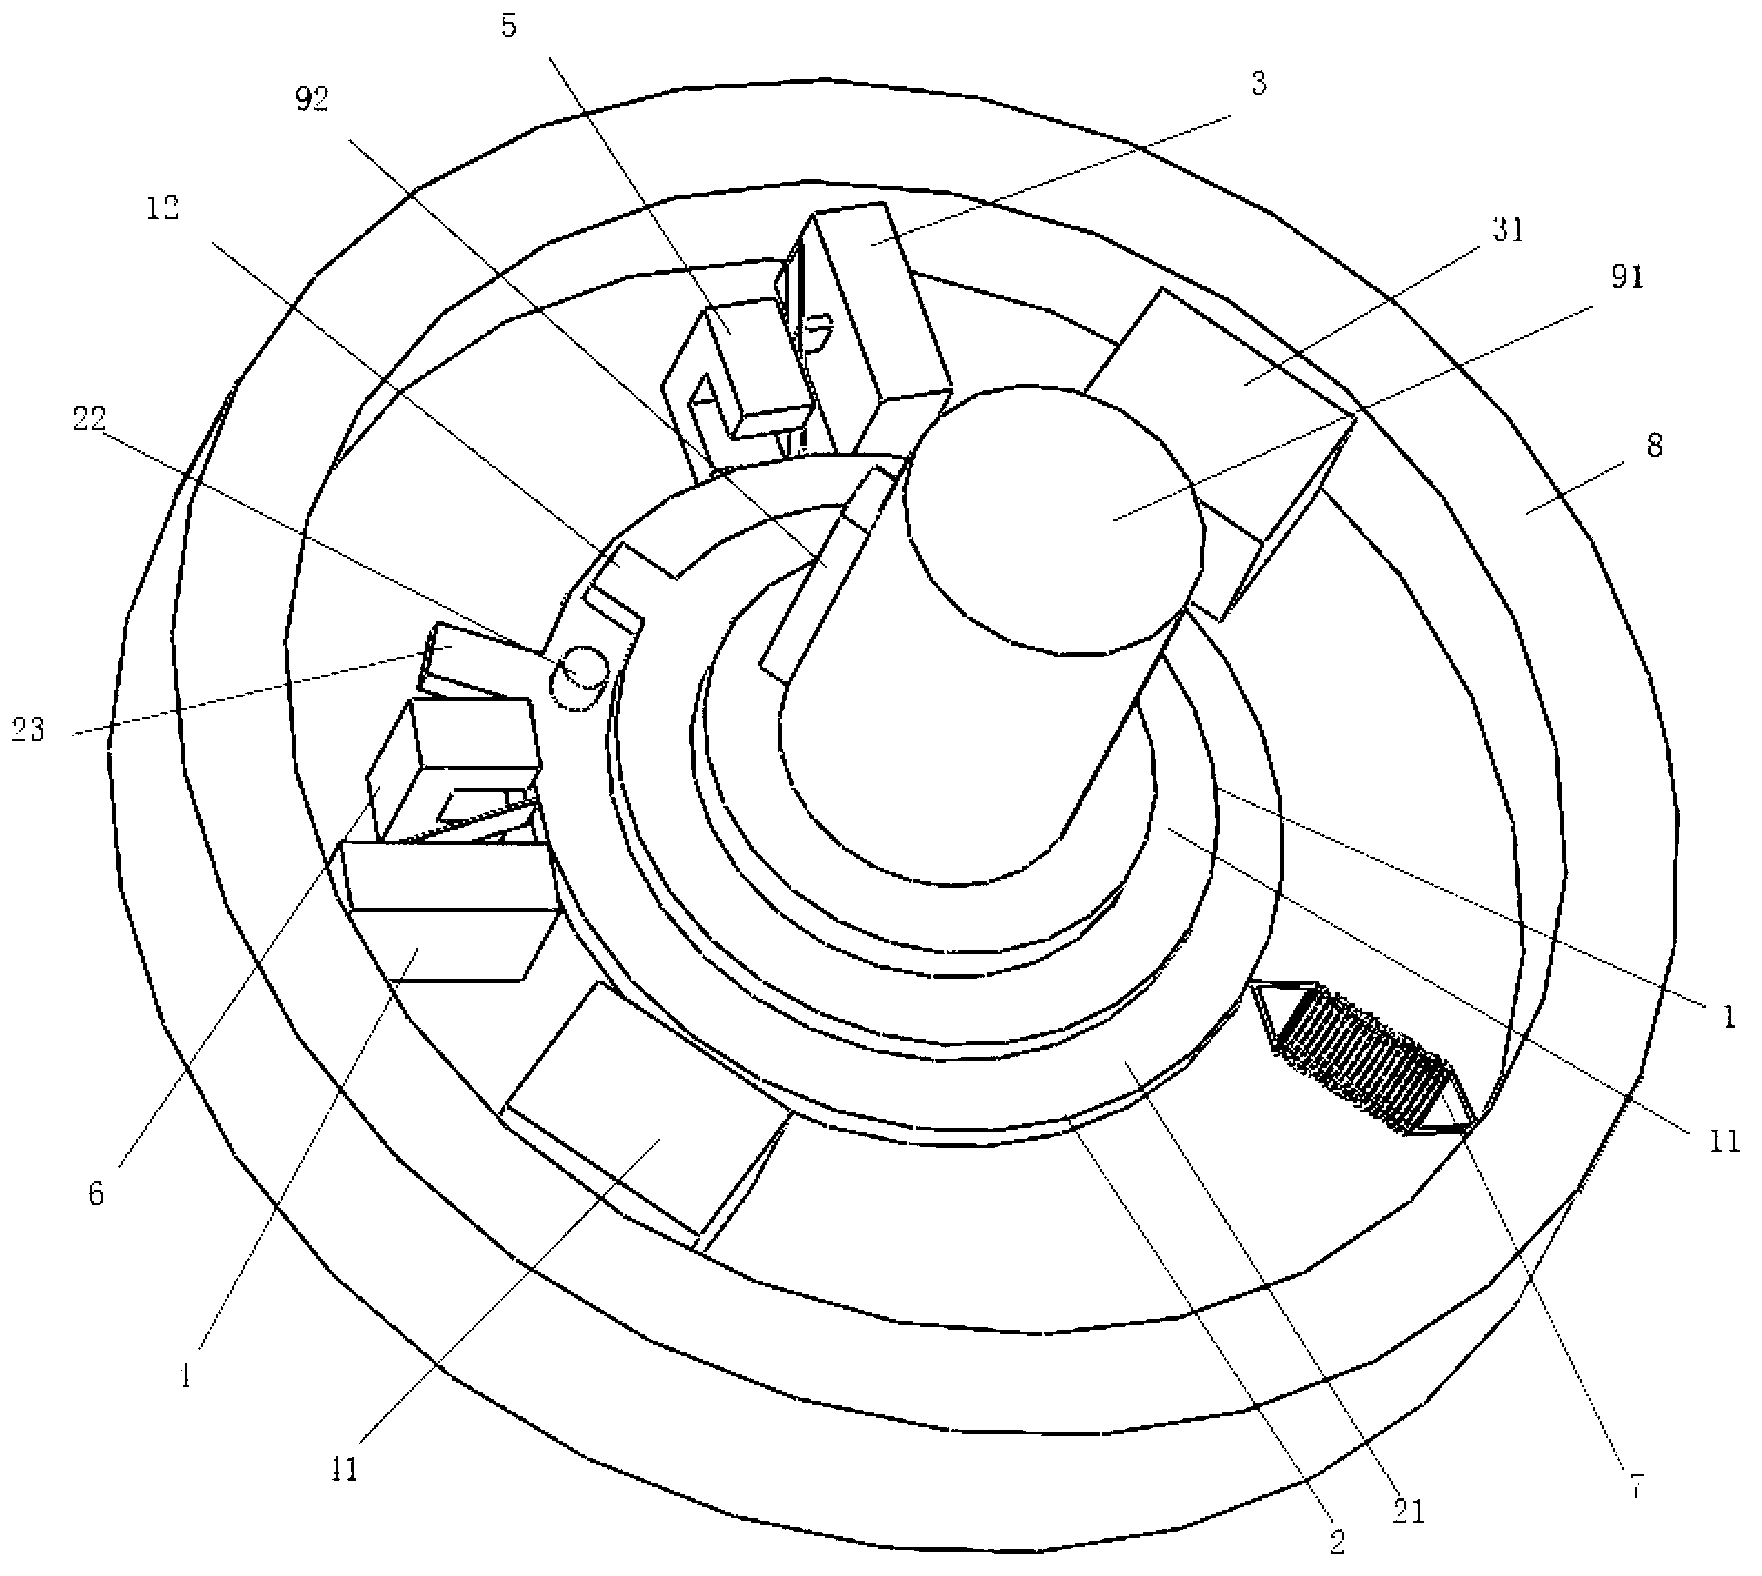 Rotation limiting device